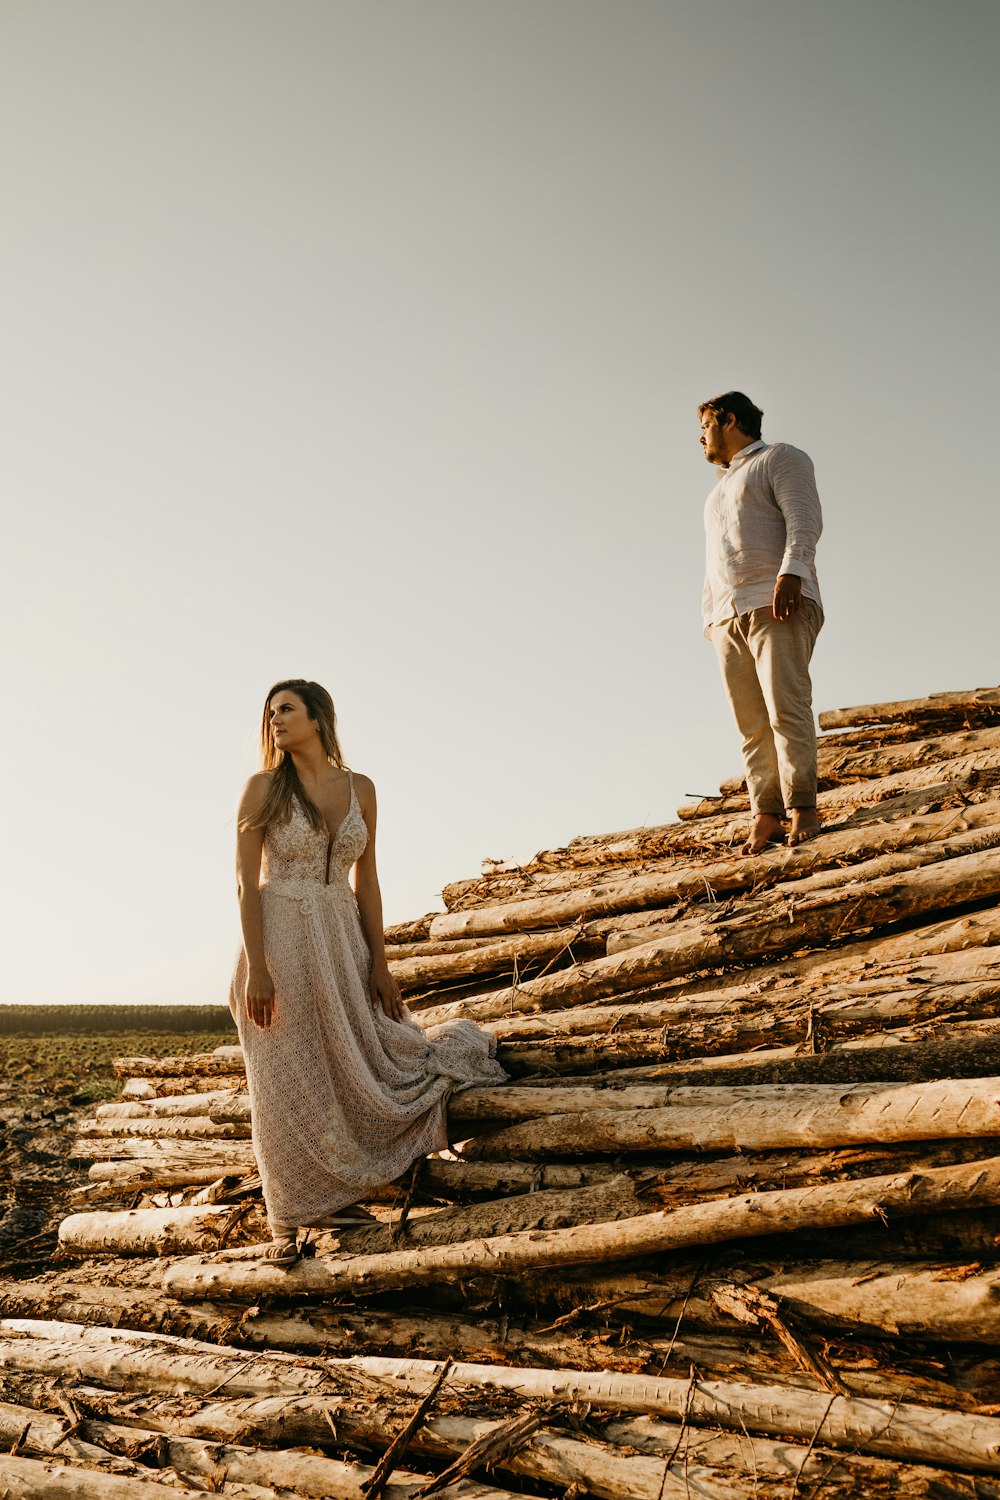 man and woman standing on pile of wood logs